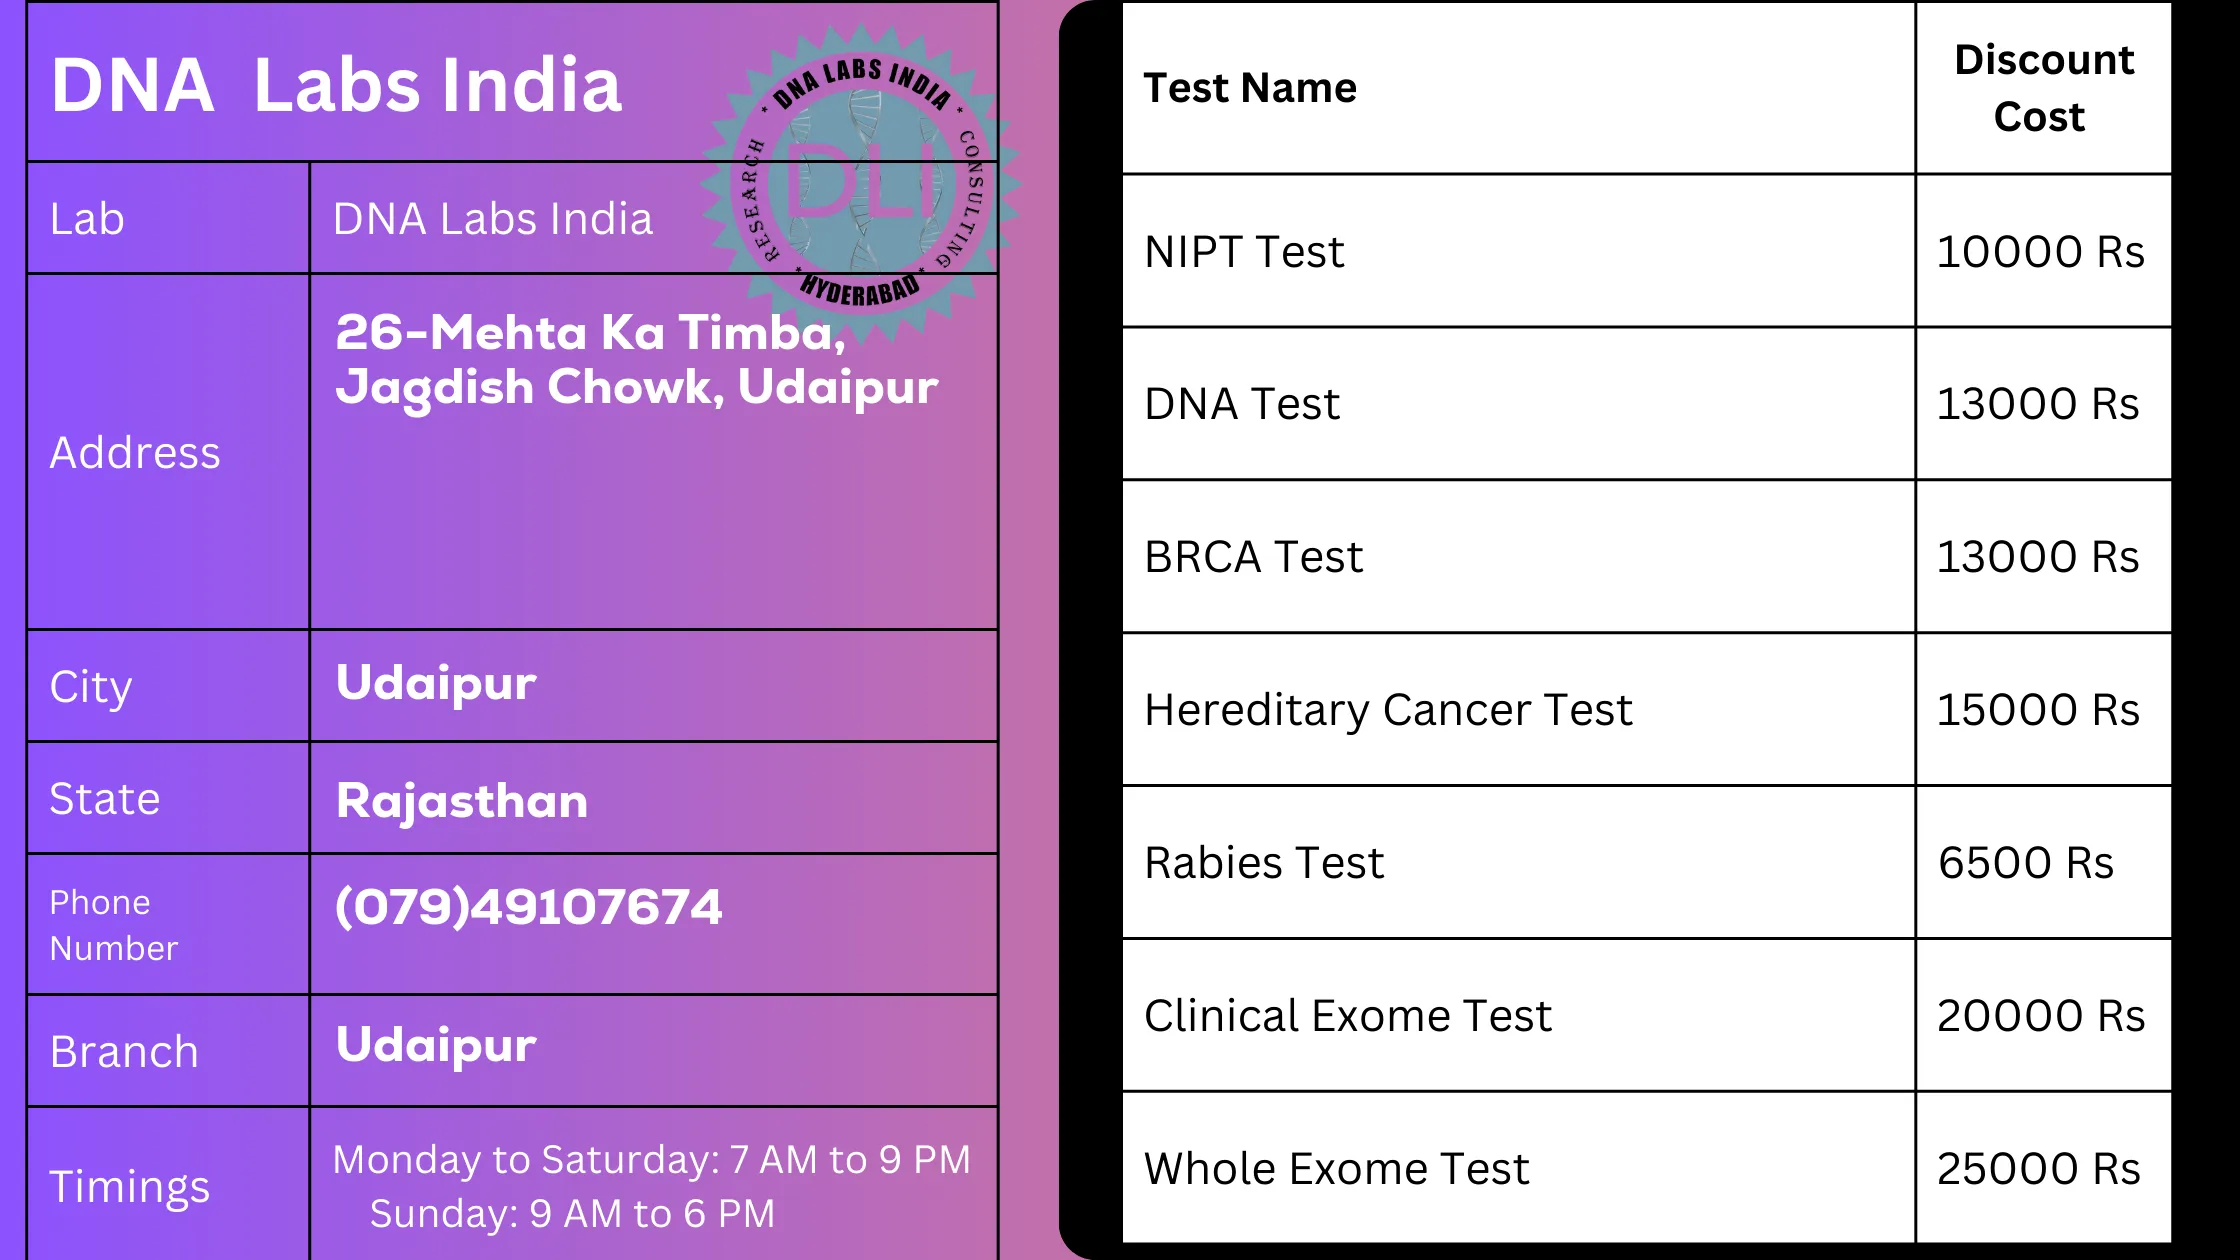 DNA Labs India in Udaipur - Get 20% Off on Tests